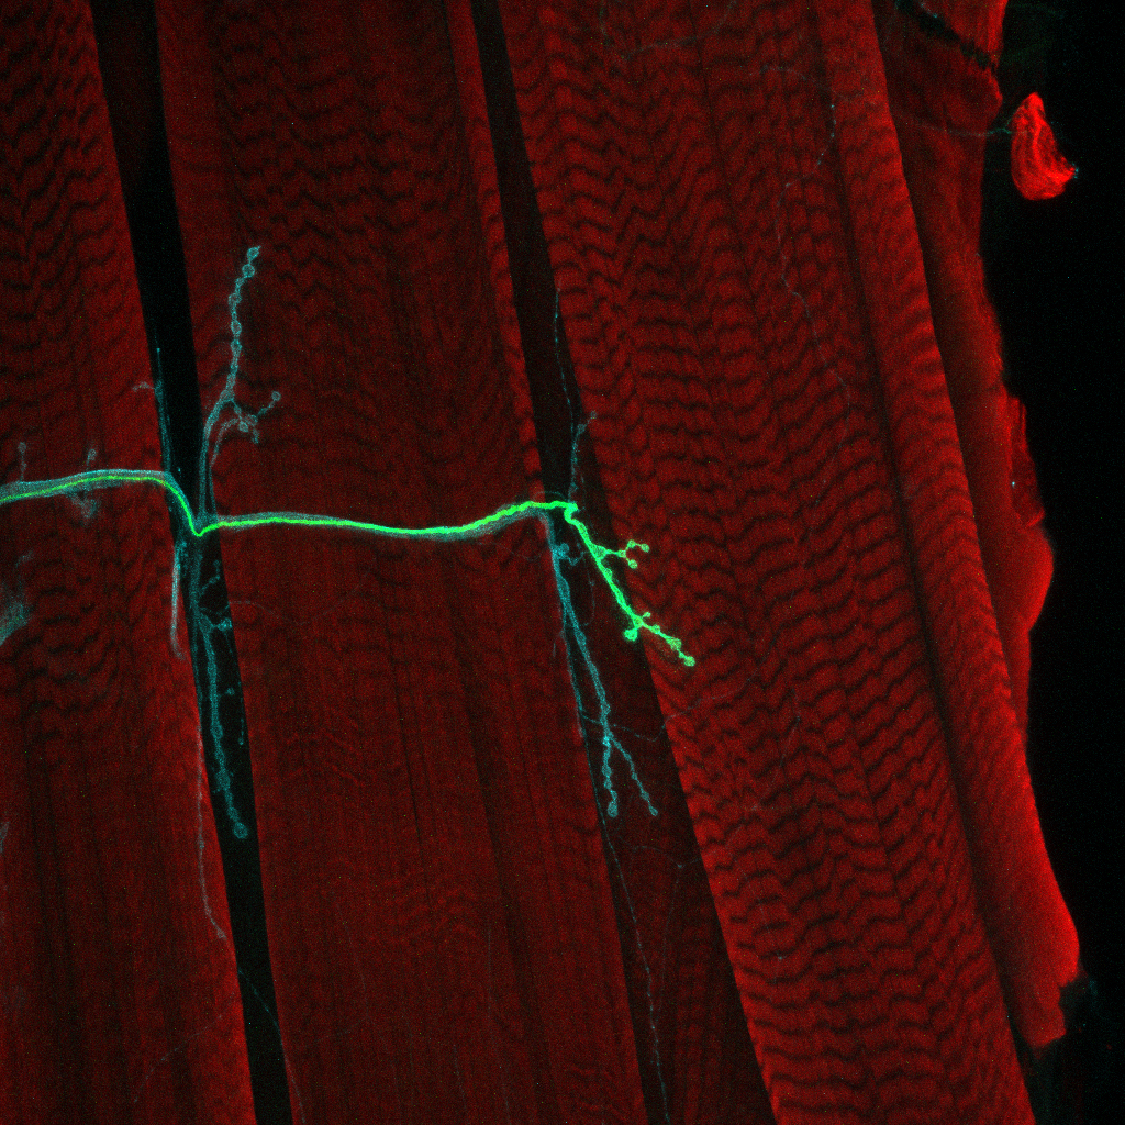 Red, wavy stripes of muscle appear behind two long spindly neurons, one stained green and the other stained magenta.